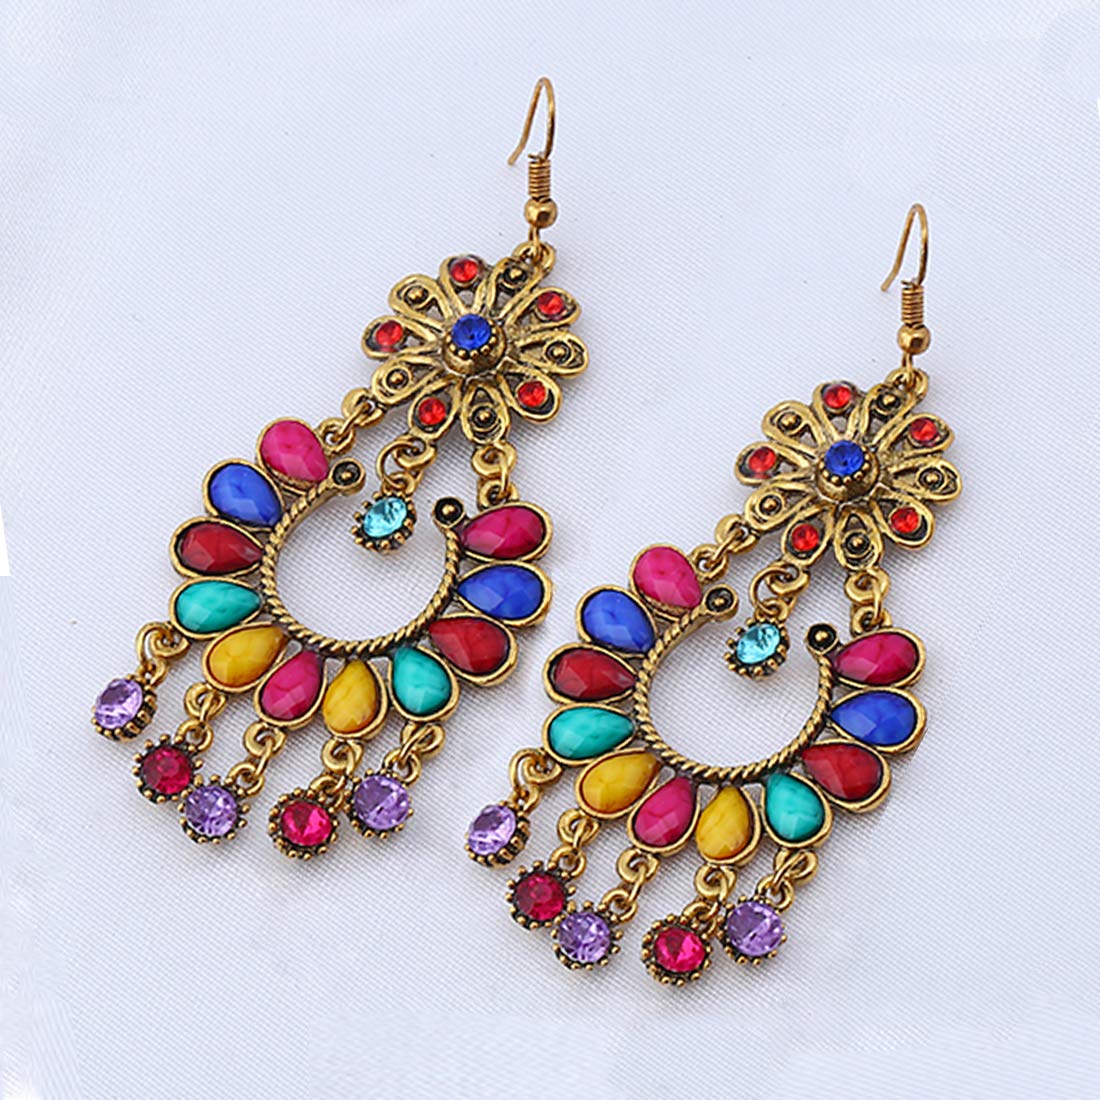 Yellow Chimes Latest Ethnic Design Antique Look Gold Plated Chandbali Earrings for Women And Girls